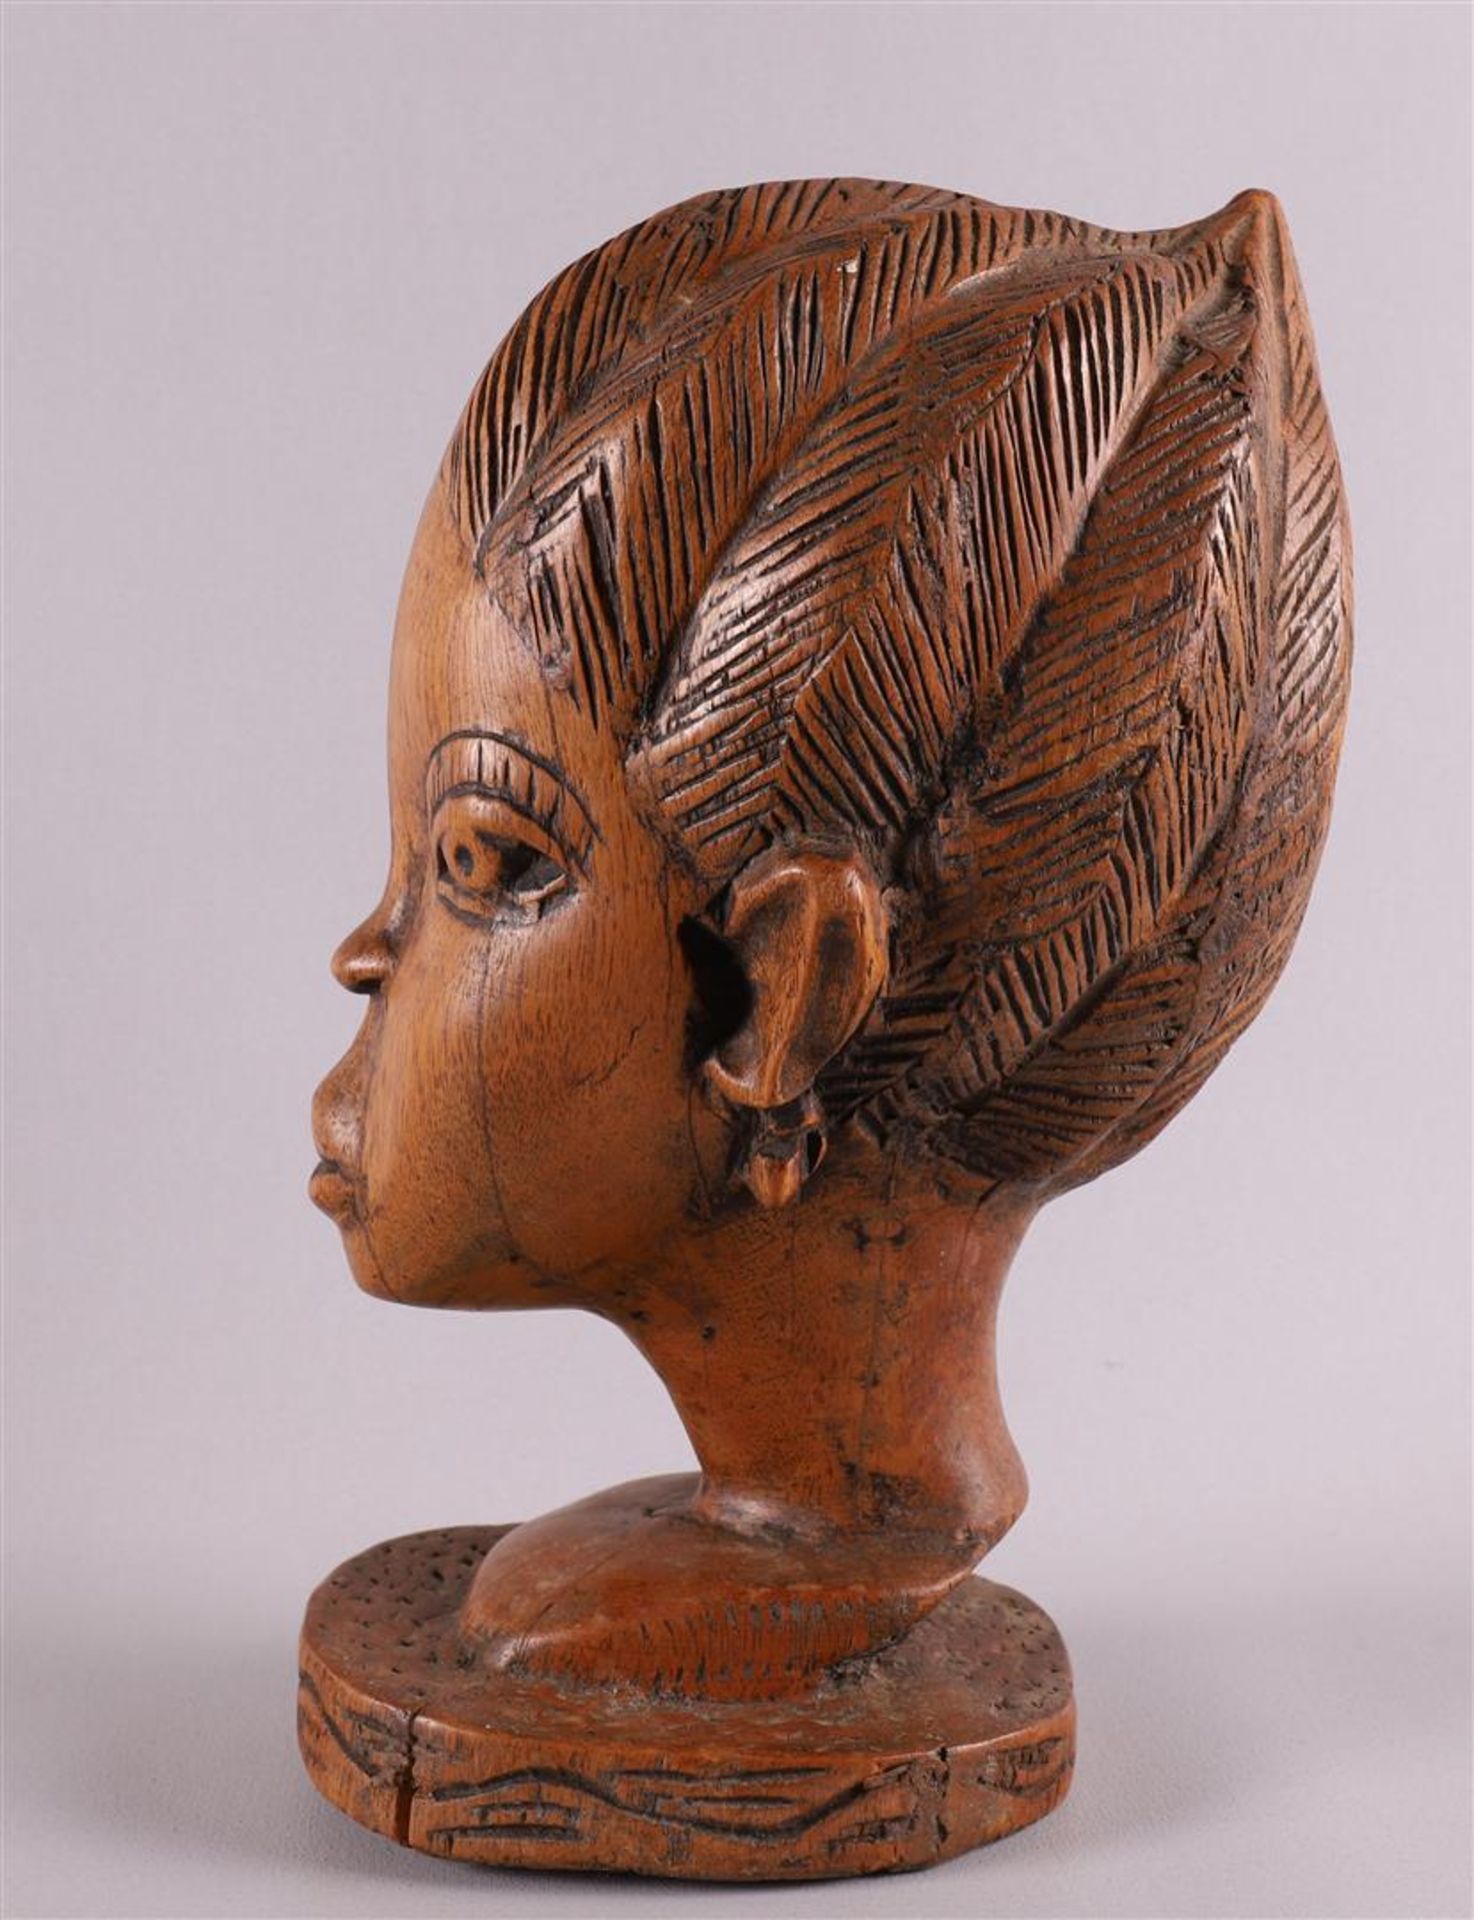 Ethnography. A tropical wooden bust of a woman, Africa, Ivory Coast or surroundings, 20th century, h - Image 2 of 4